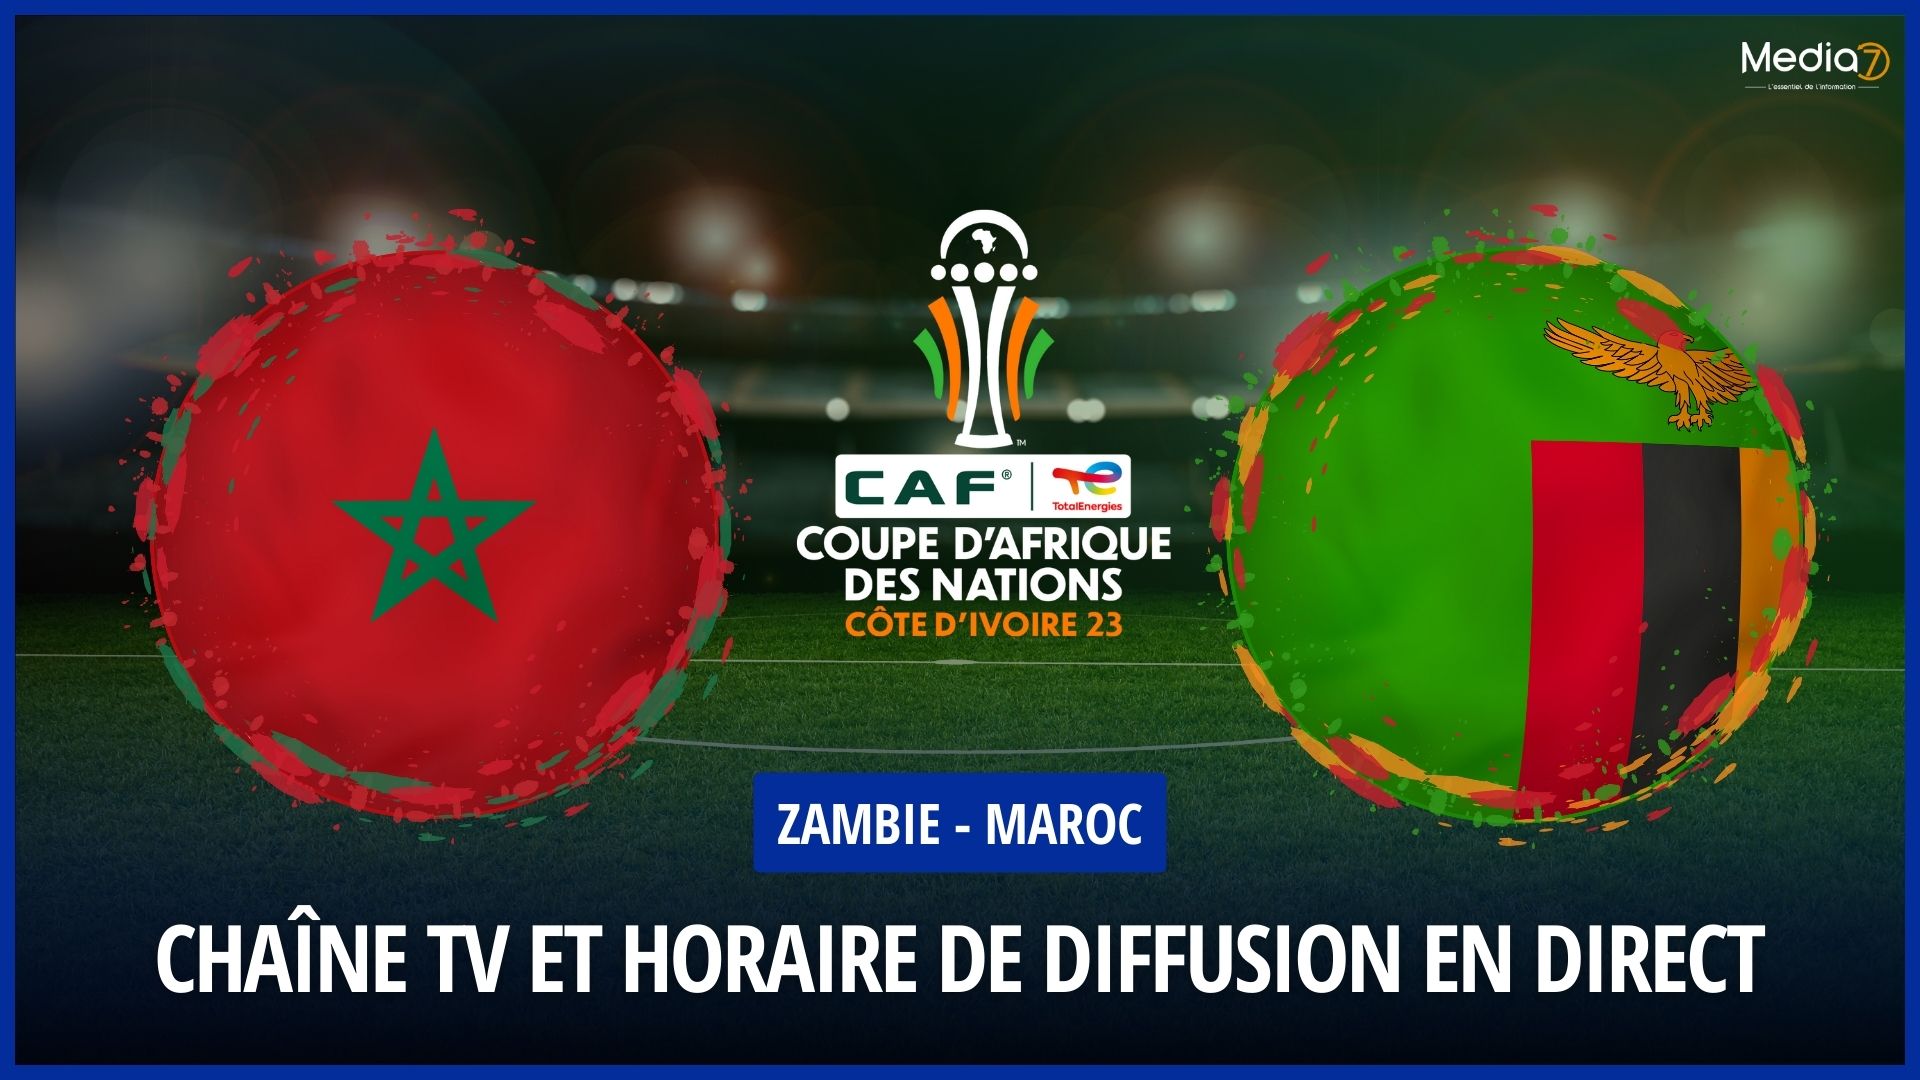 Zambia - Morocco Match: Live Broadcast and Schedules not to be missed - Media7